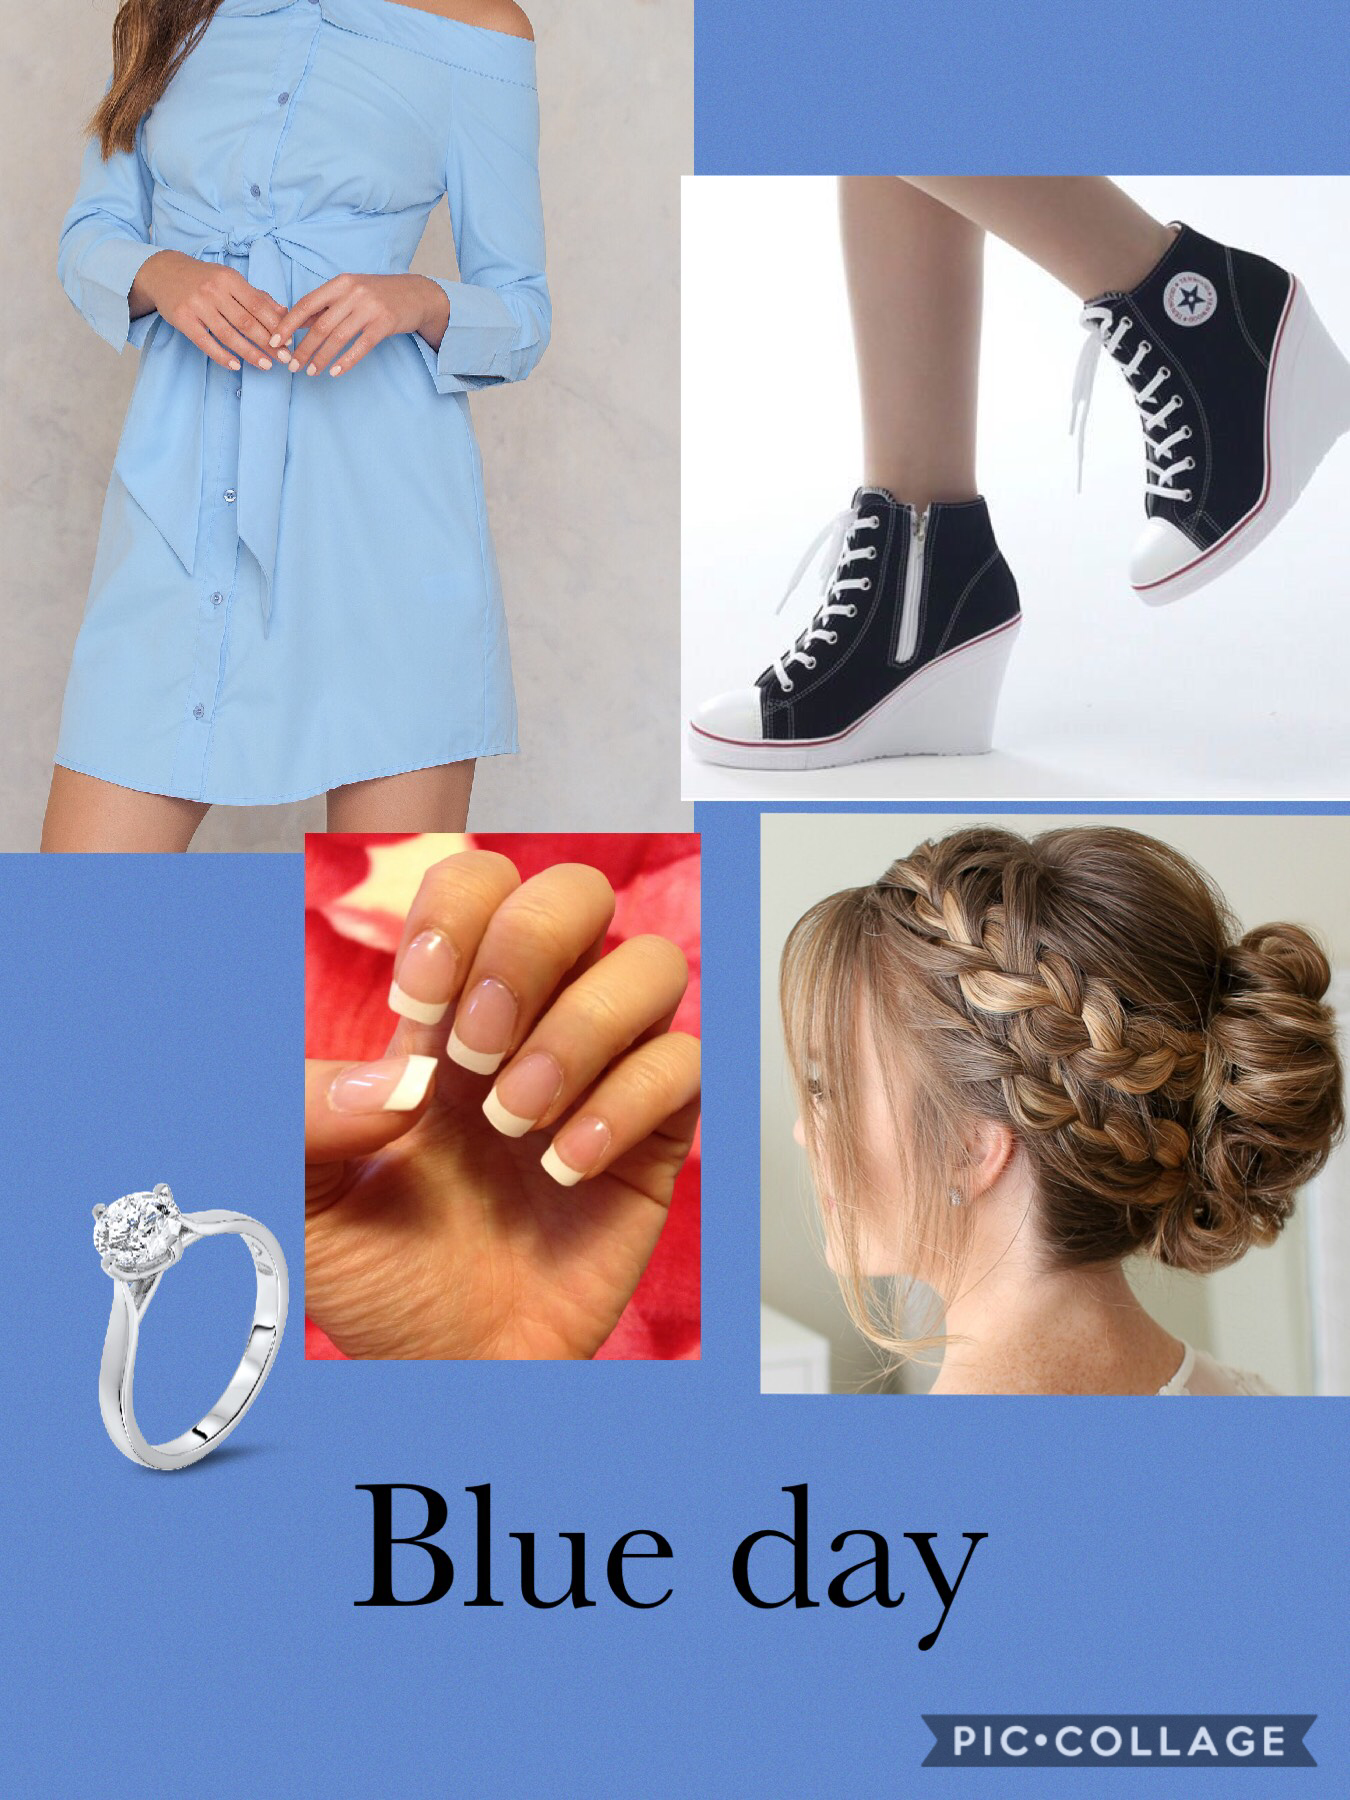 Blue day